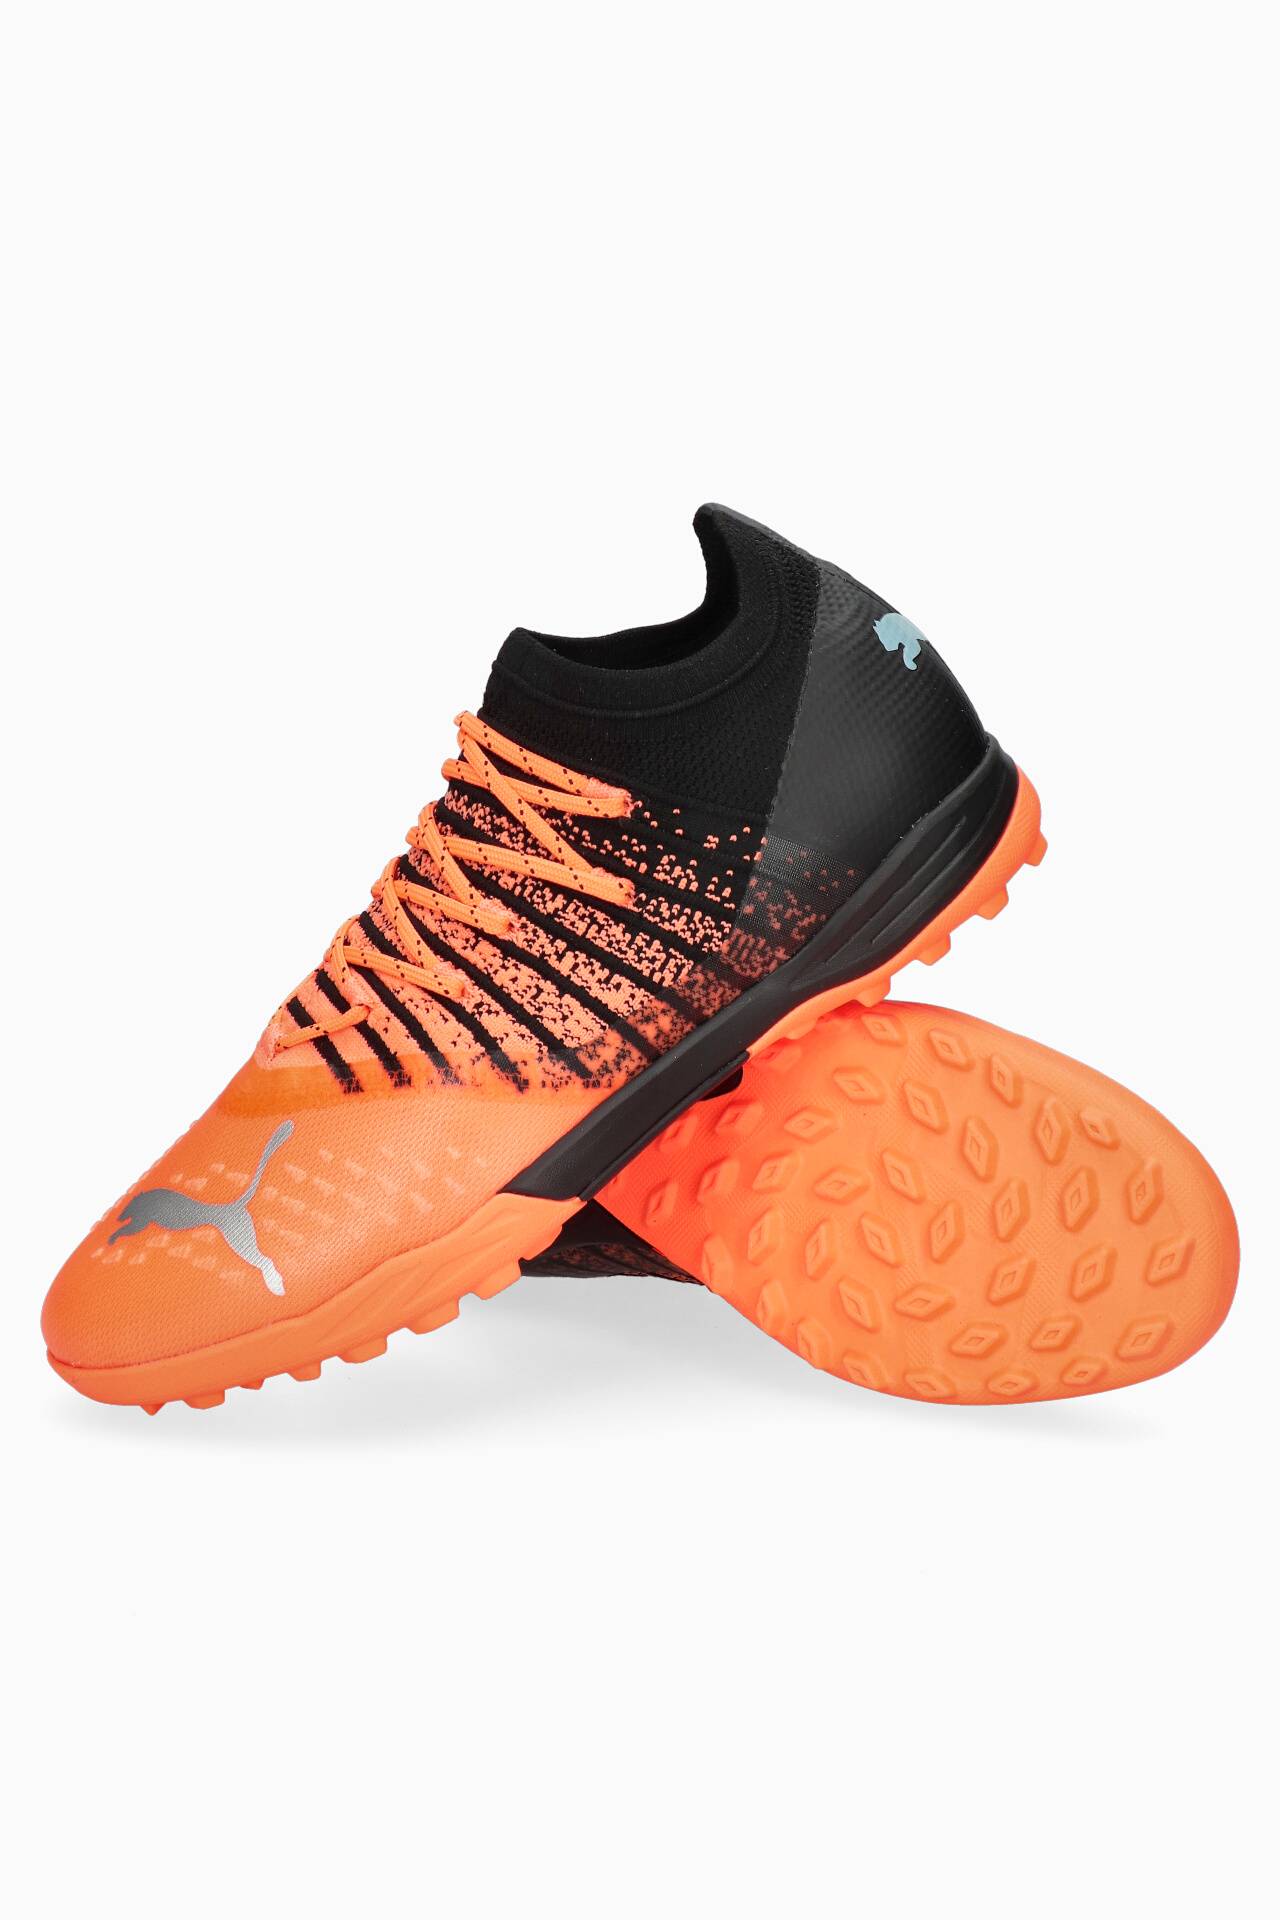 Puma Future Z 1.3 Review: Best Puma Future Yet - BOOTHYPE